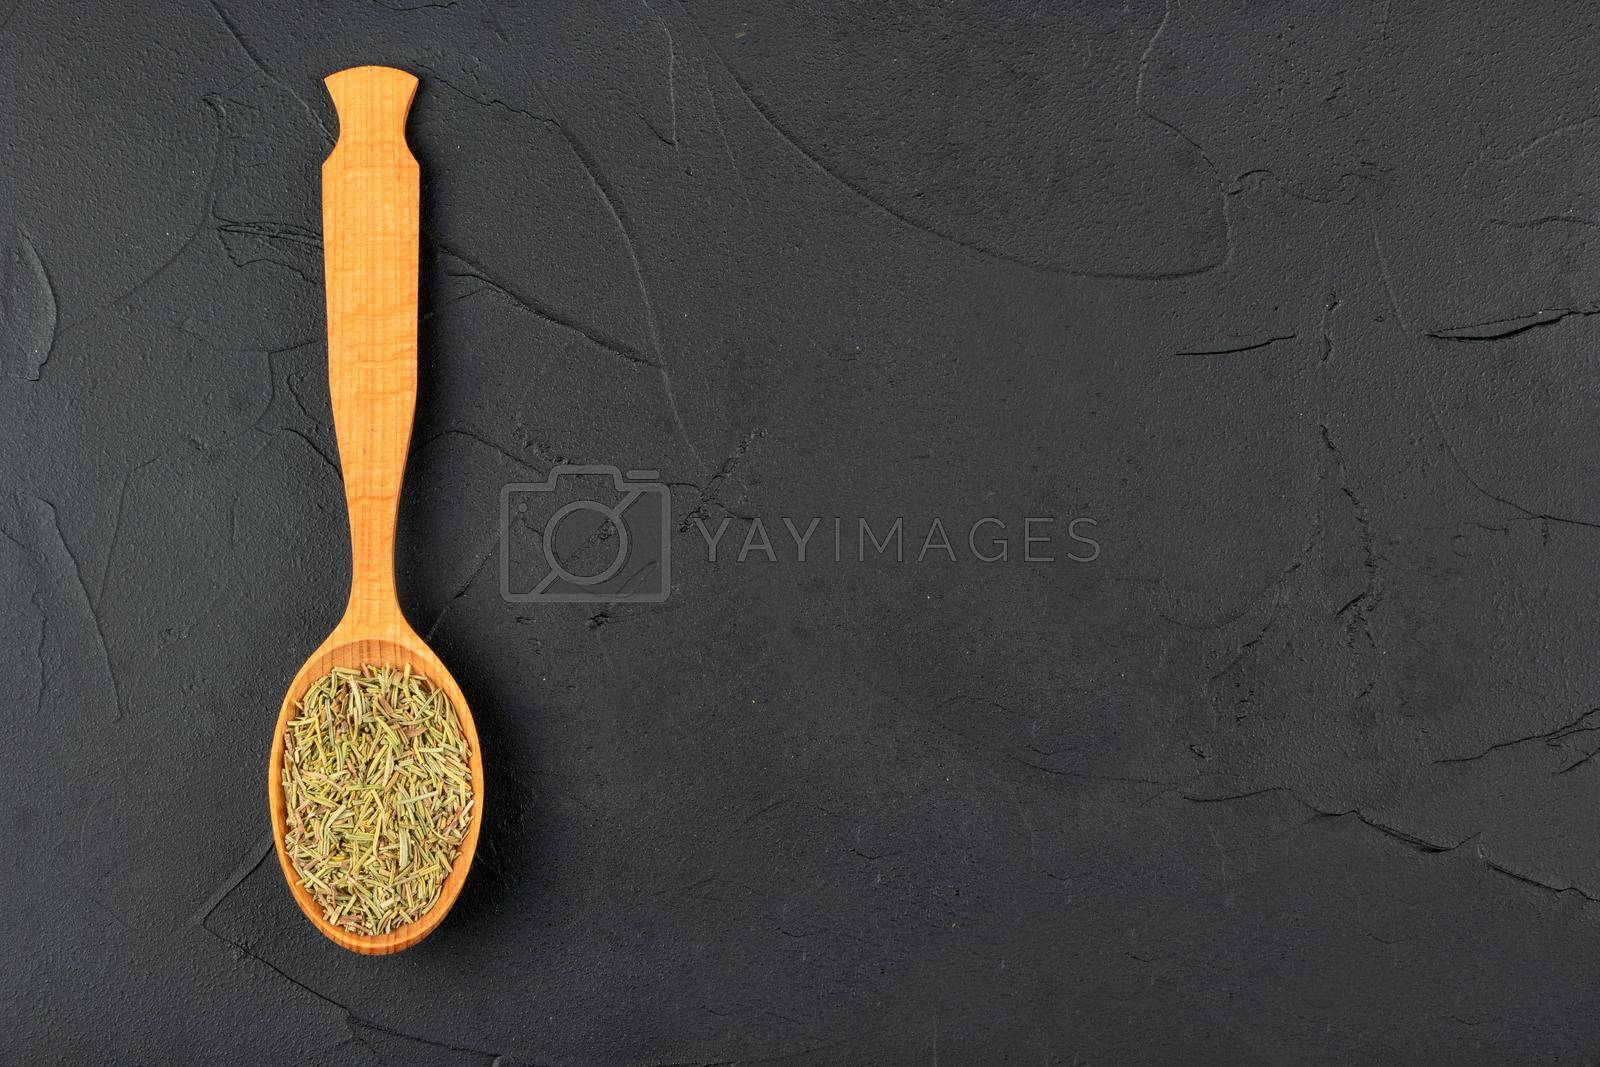 Royalty free image of Dry rosemary in a spoon by andregric